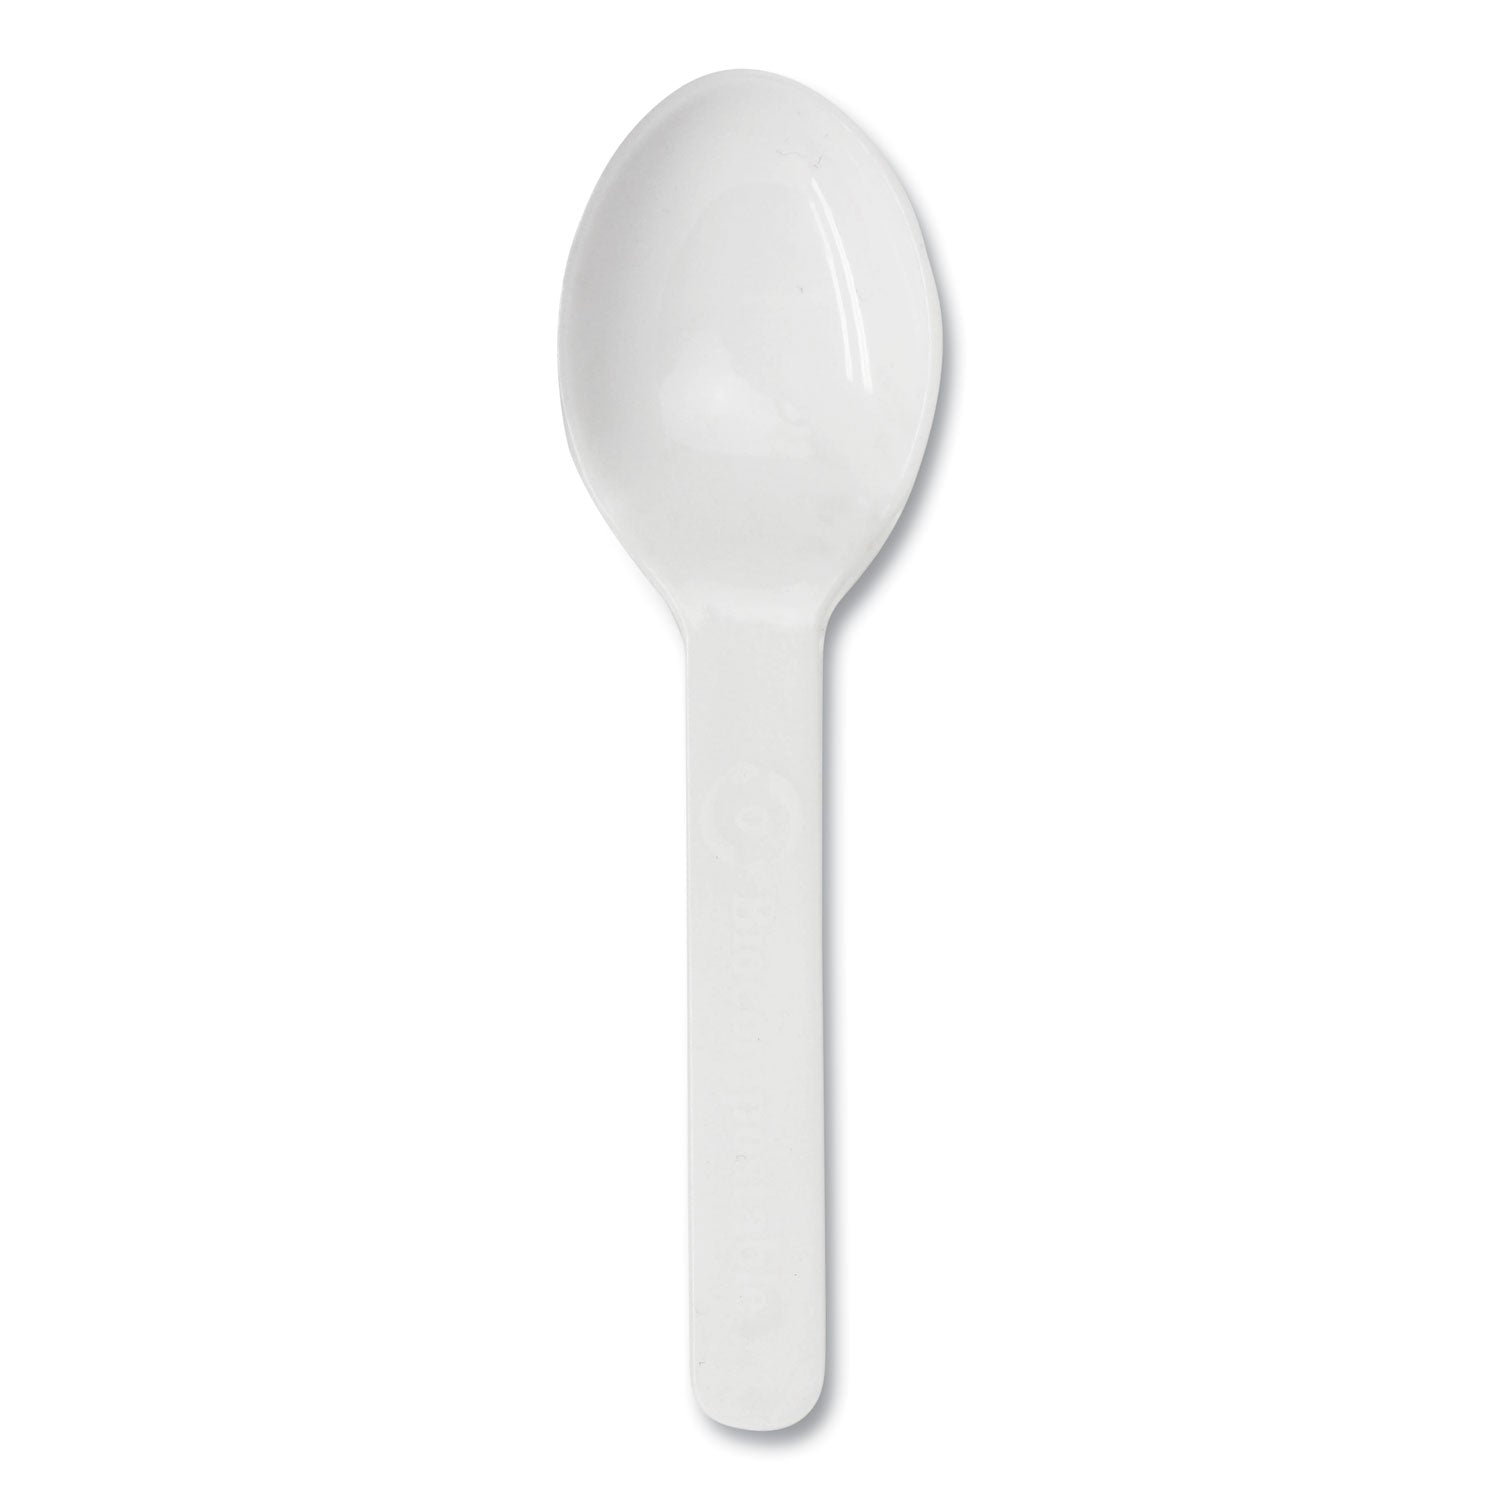 pla-compostable-cutlery-tasting-spoon-white-3000-carton_worspcs3 - 1